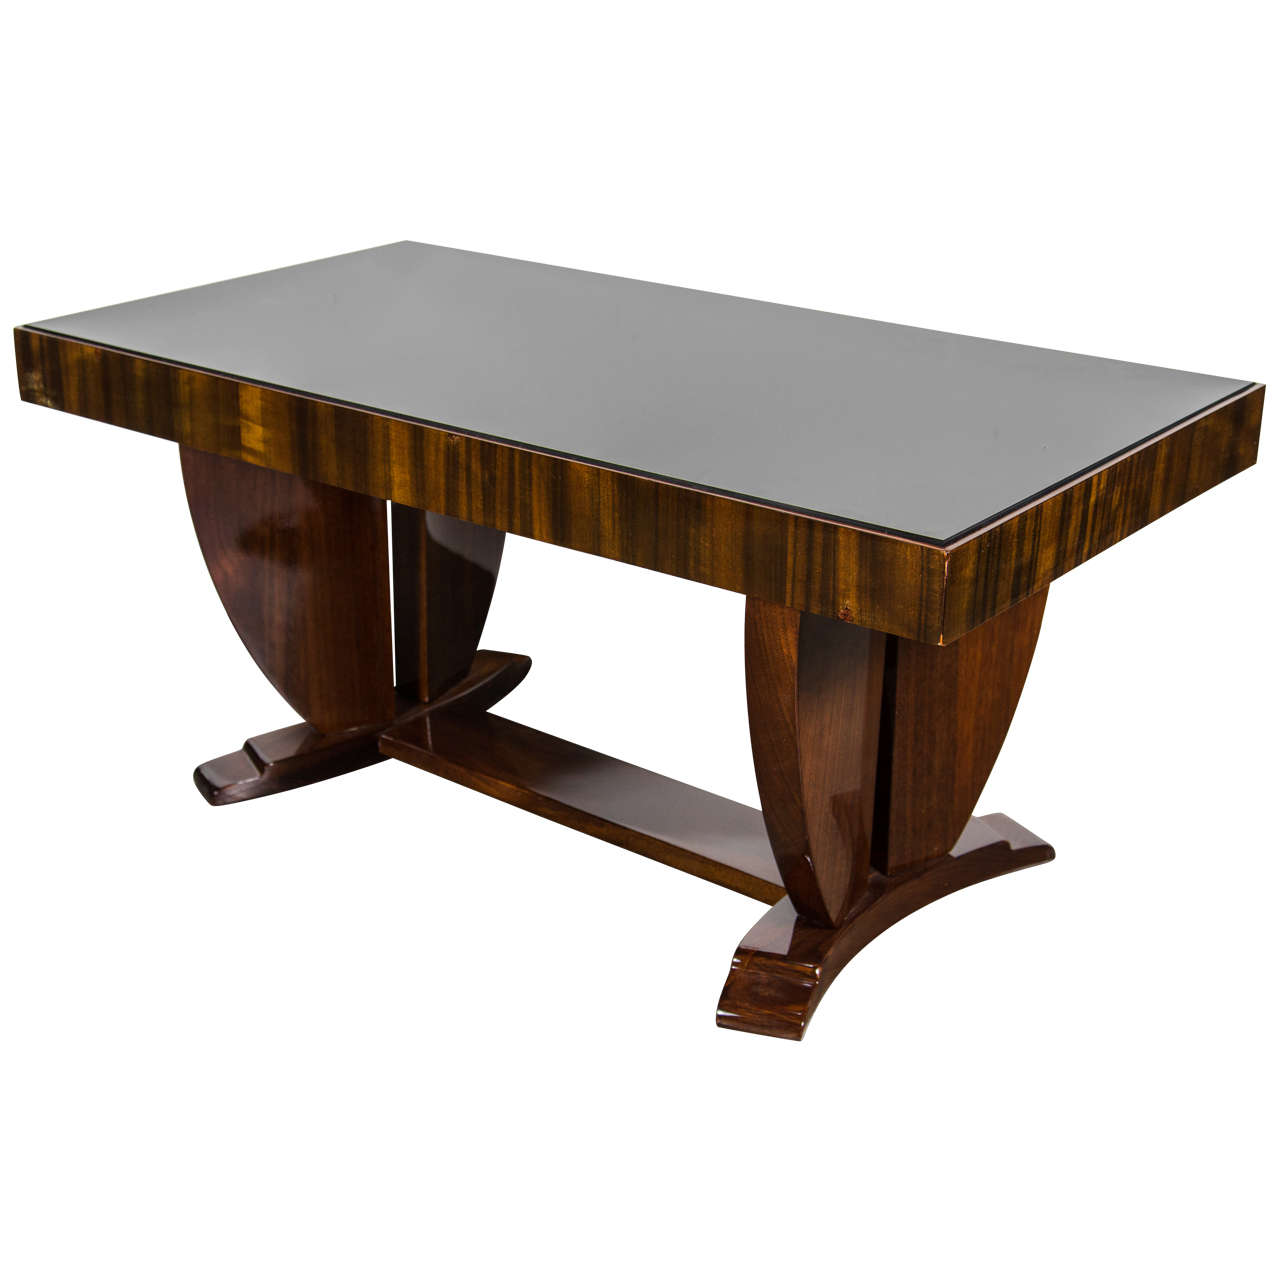 Art Deco Skyscraper Style Cocktail Table in Book-Matched Walnut and Vitrolite Top